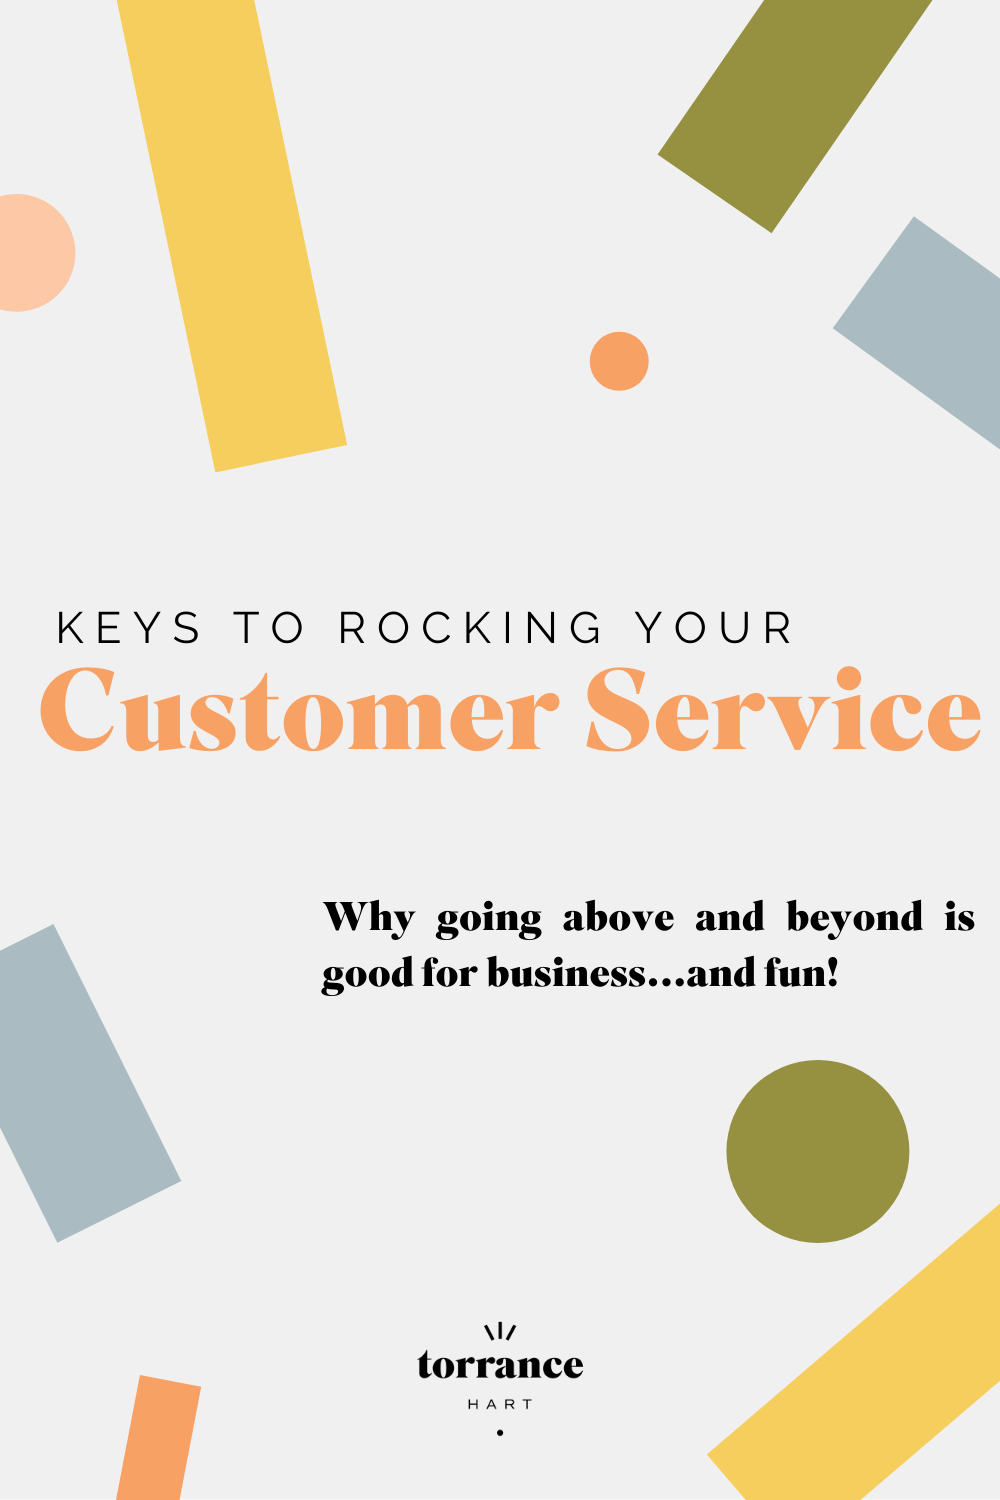 Keys to Rocking Your Customer Service